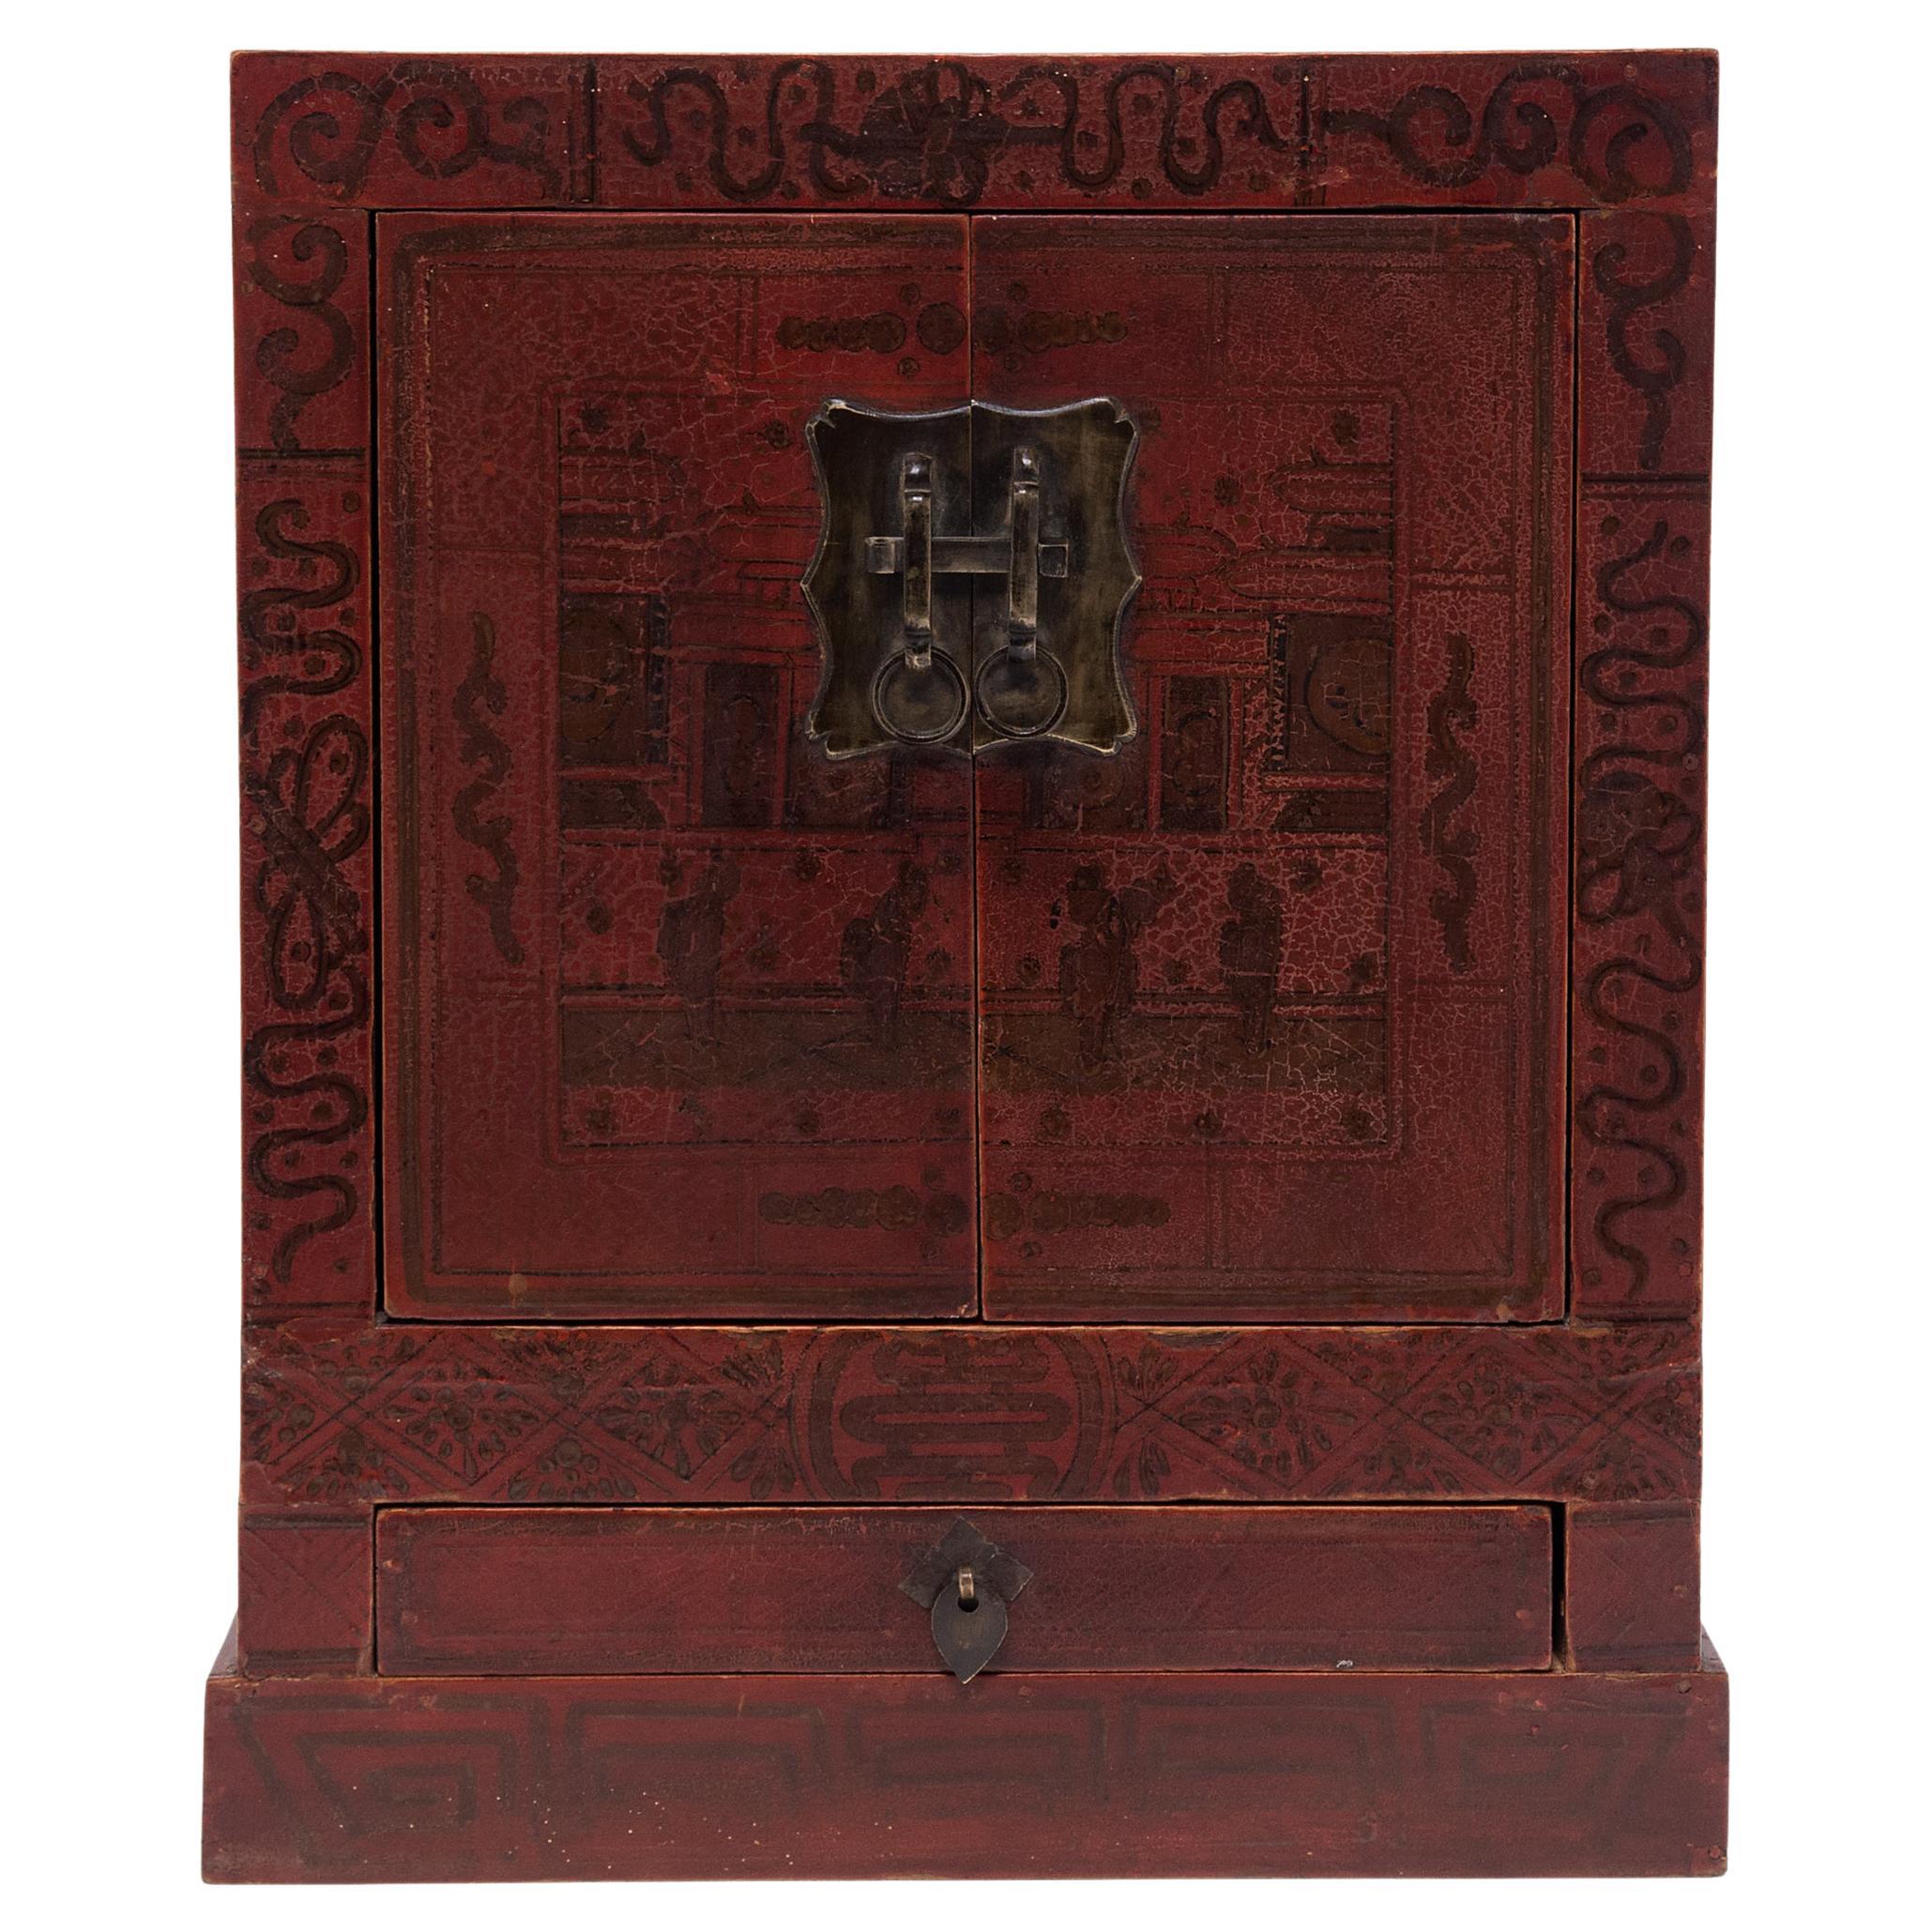 Chinese Painted Red Lacquer Shrine Box, c. 1900